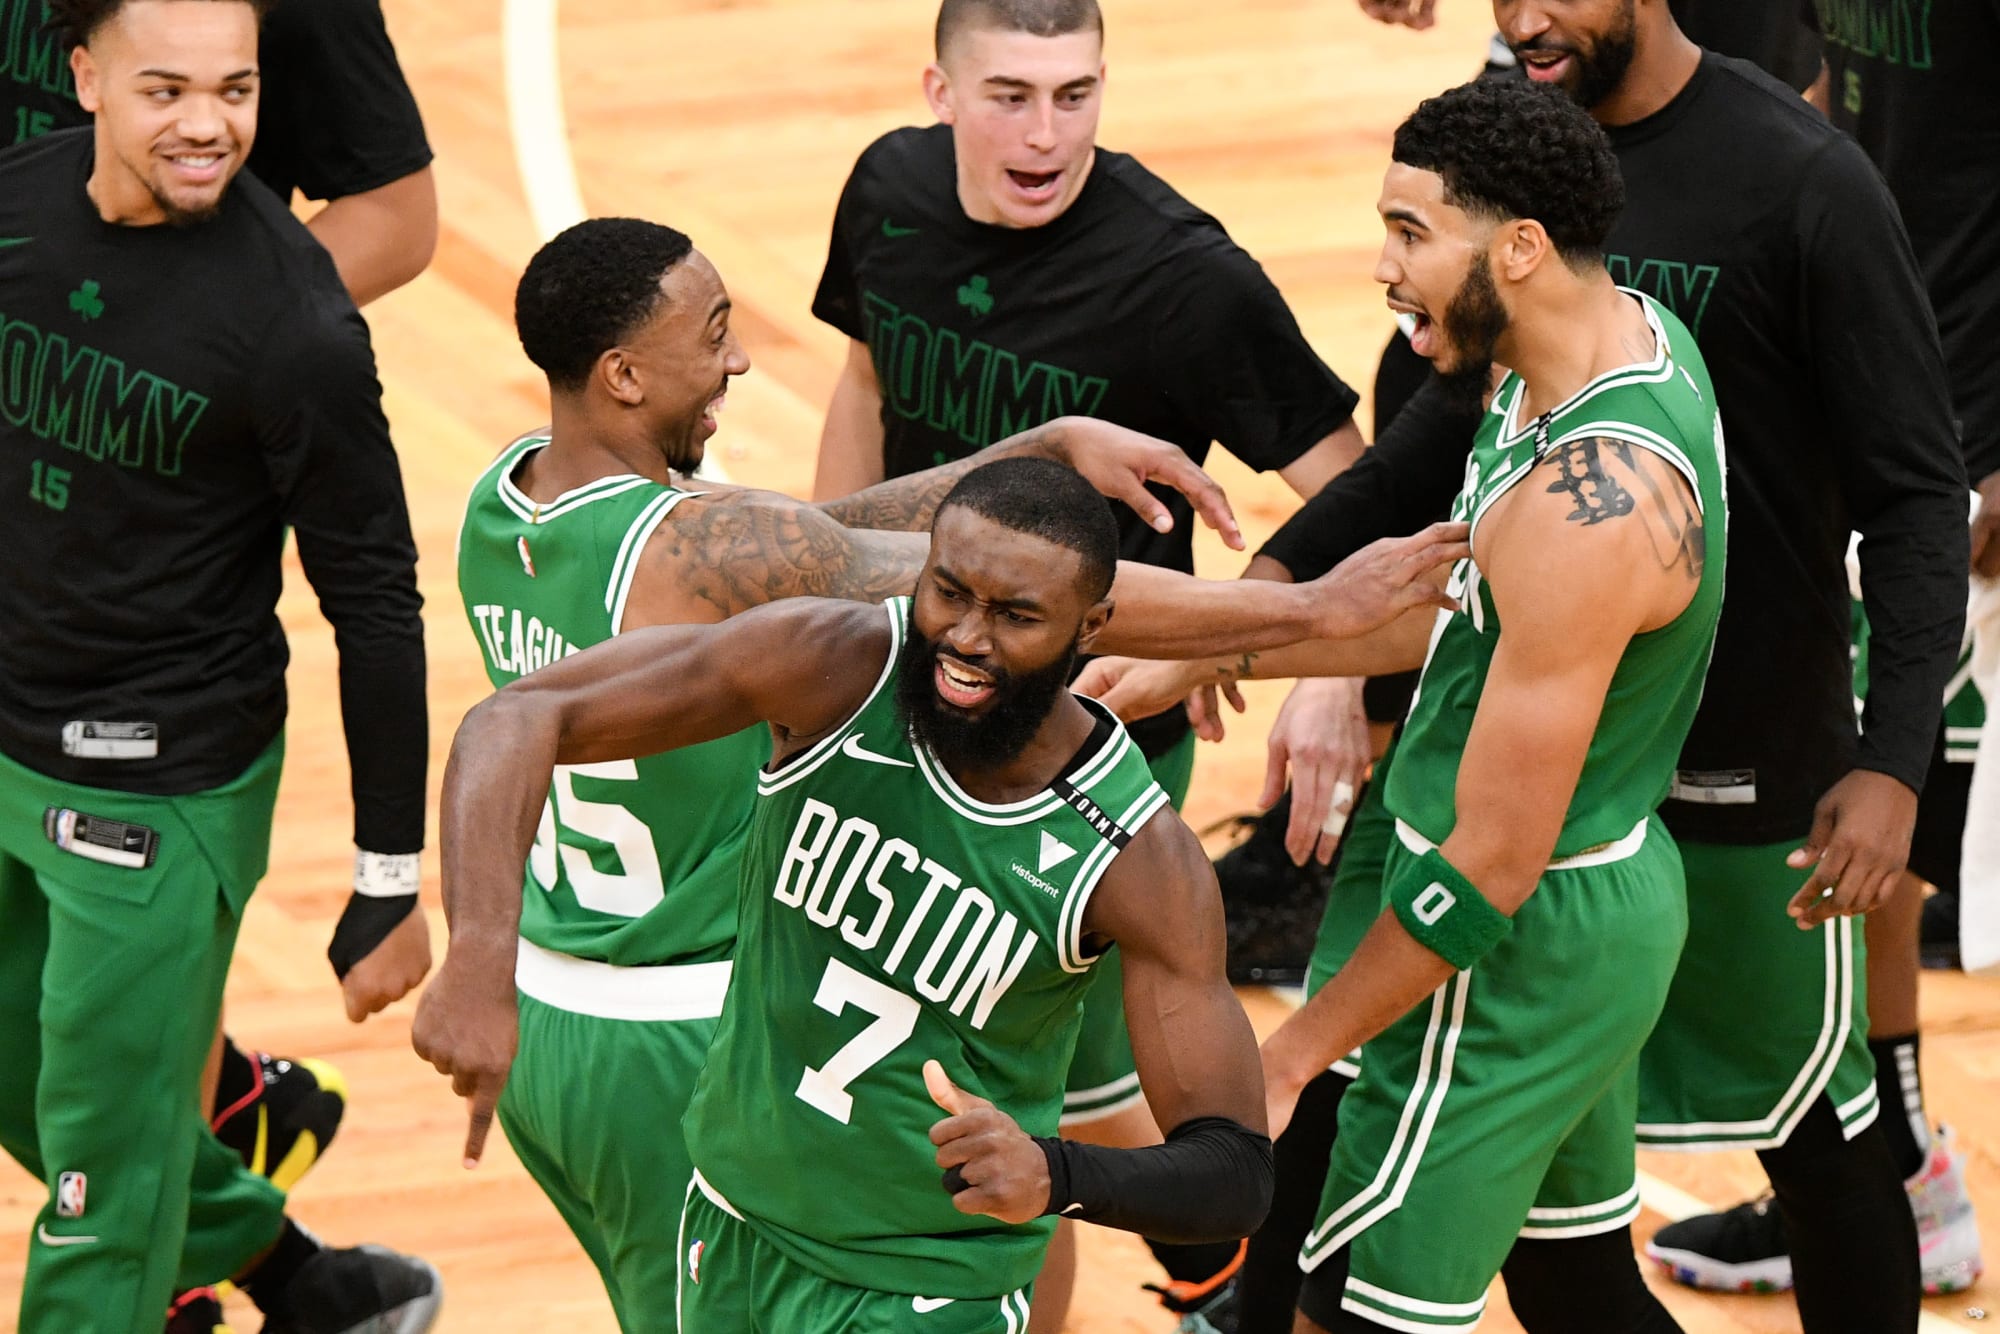 Boston Celtics The Cs Top 3 Performers In First Quarter Of The Season